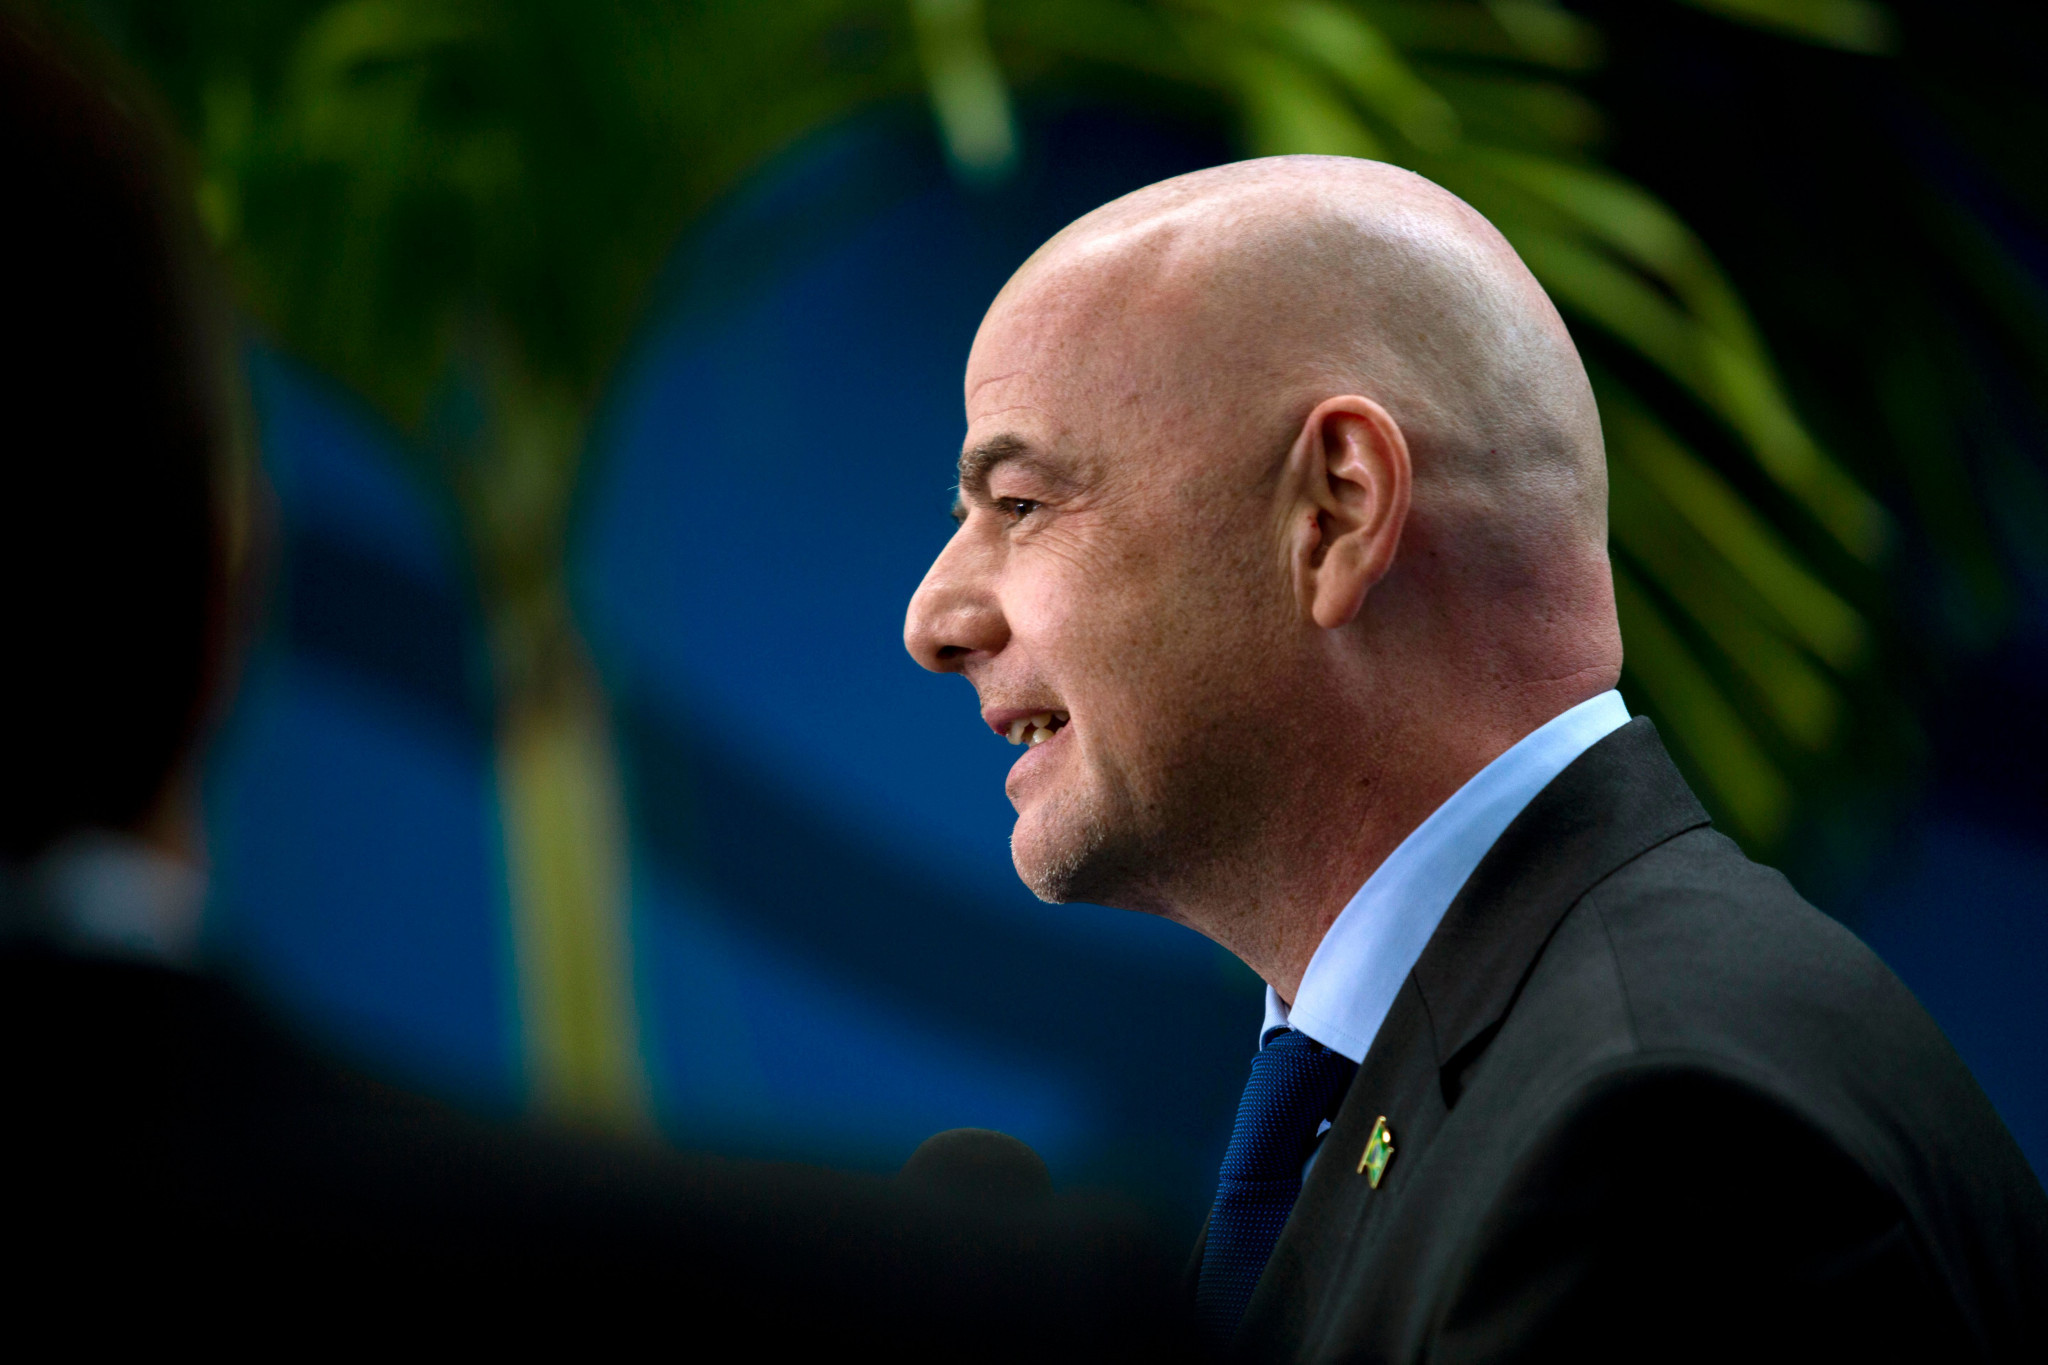 FIFA President Gianni Infantino says the missing CFH10 million cannot be forgoten ©Getty Images